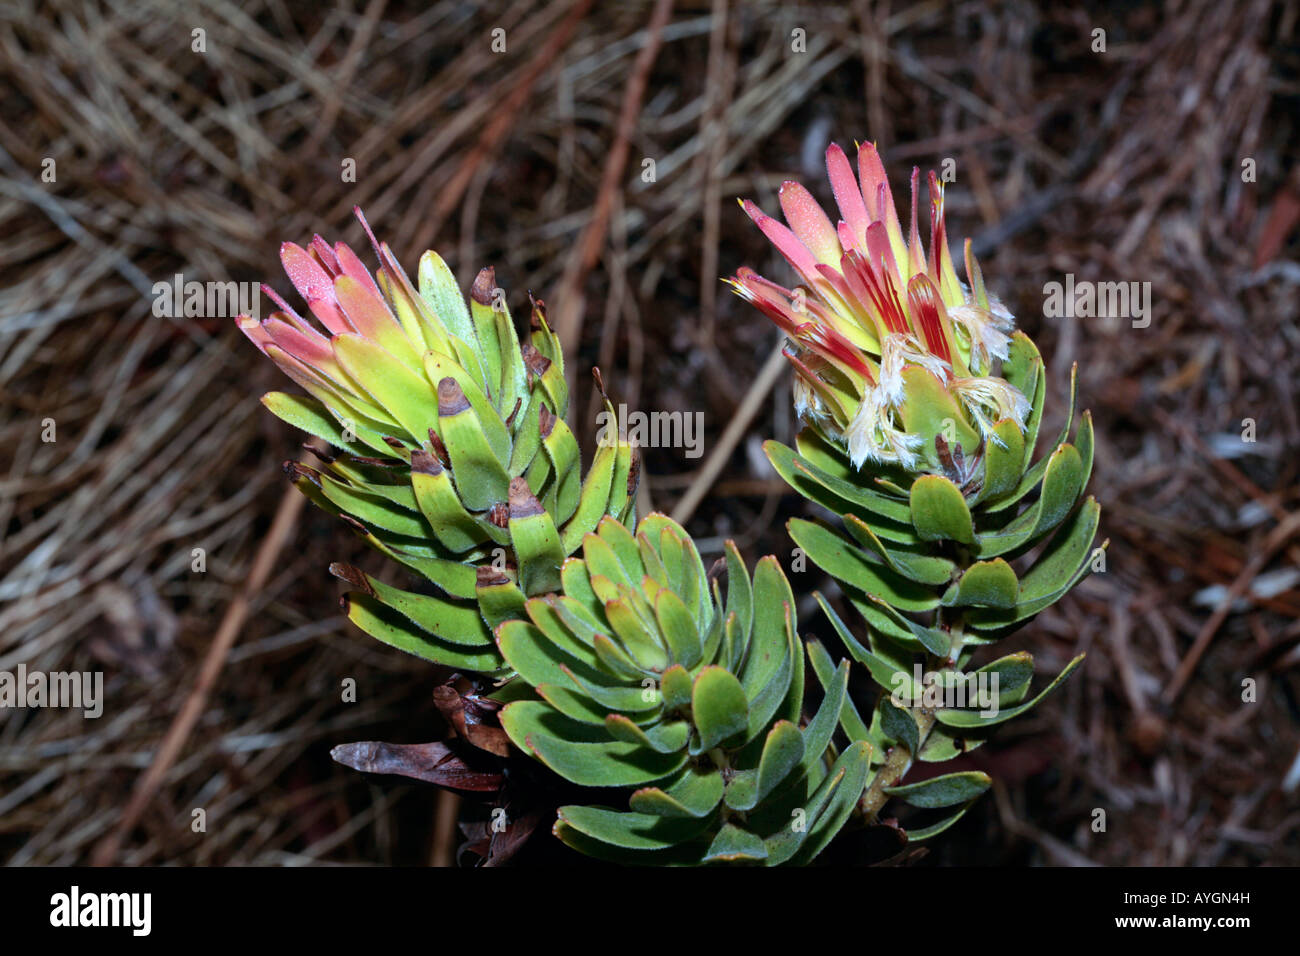 Red-crested/ Red/ Common Pagoda/ Rooistompe/ Stompie/ Common Mimetes/ Pagoda - Mimetes cucullatus - Family Proteaceae Stock Photo